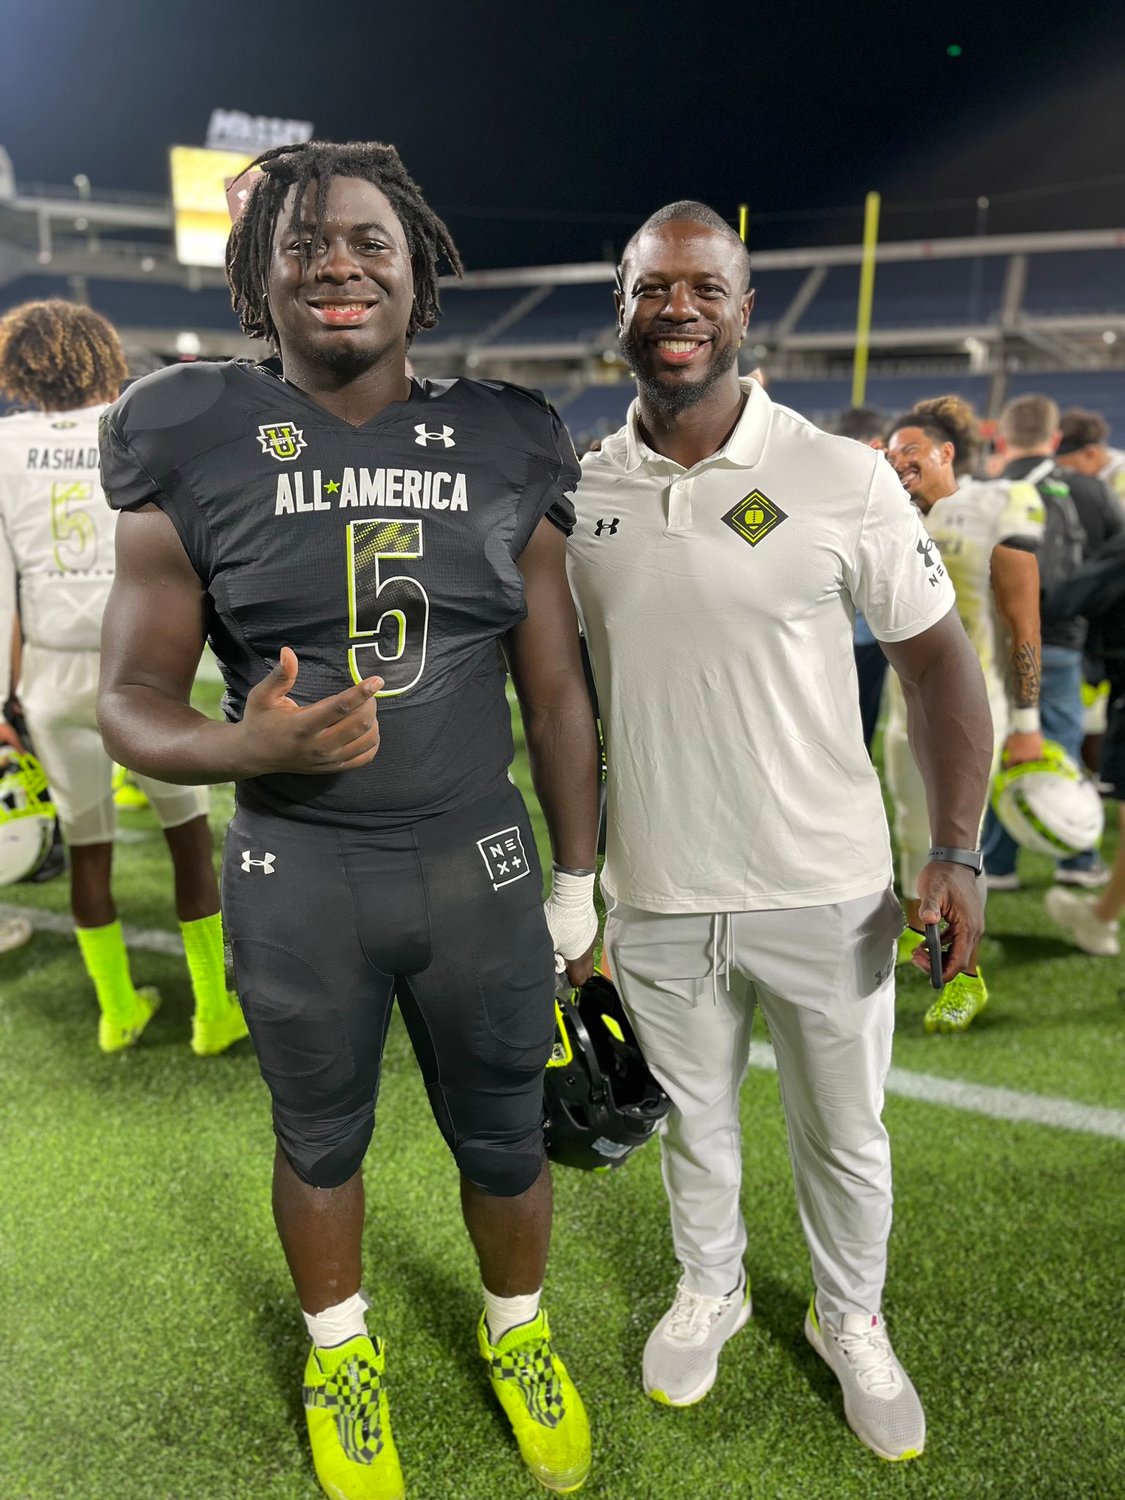 David Hicks Sr. and D.J. Hicks pose for a photo during the Under Armour All-American game.